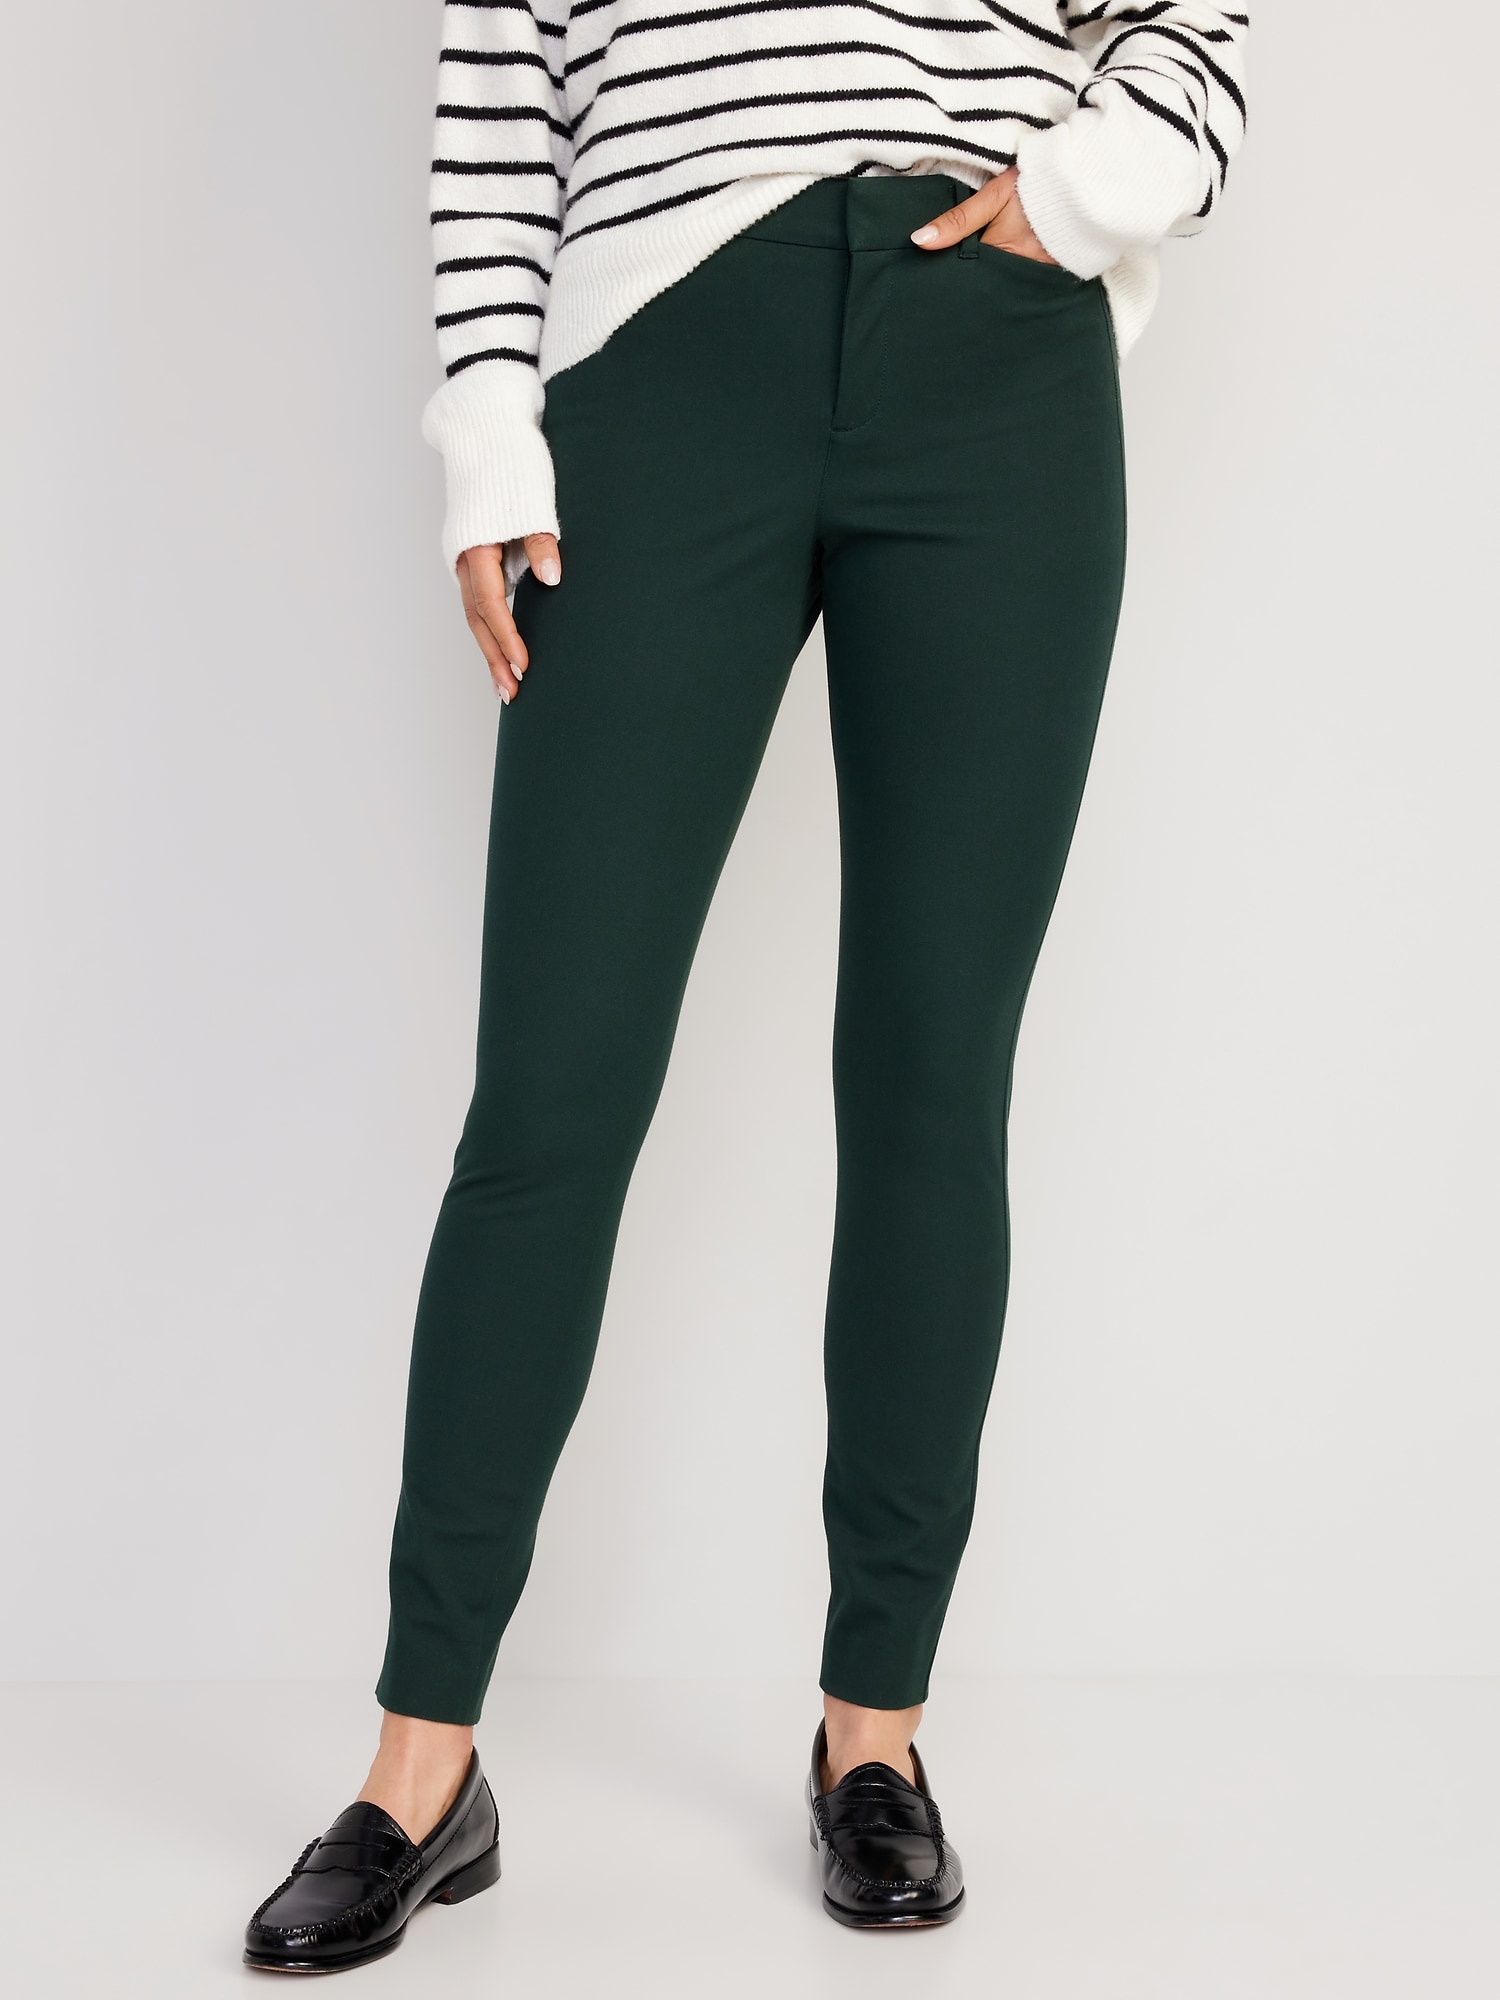 Zara Solid Green Casual Pants Size XS - 39% off